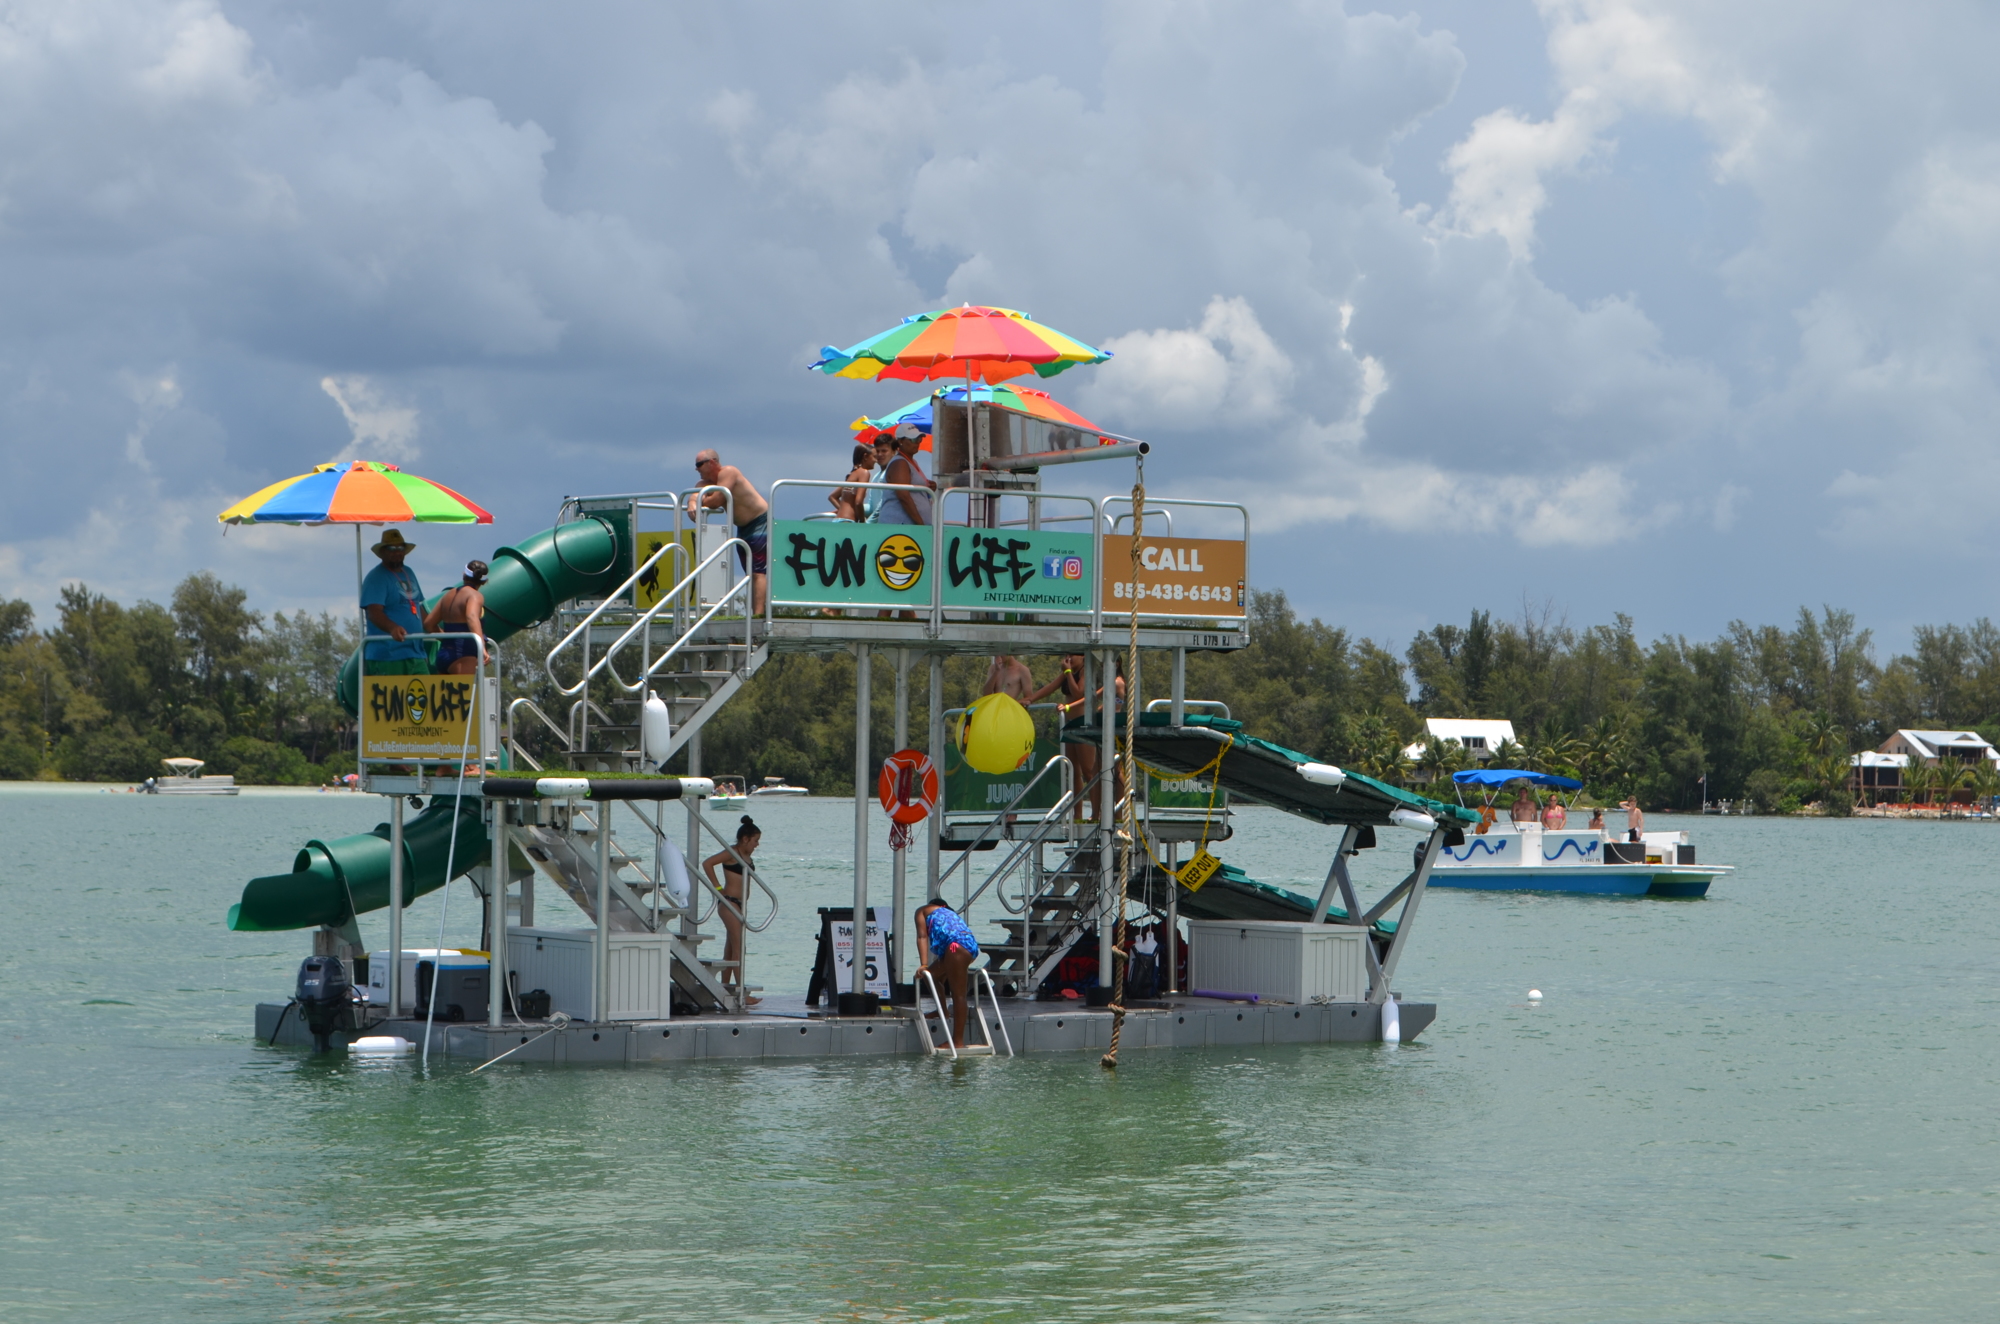 A floating playground arrived on the north end of Longboat Key this summer.